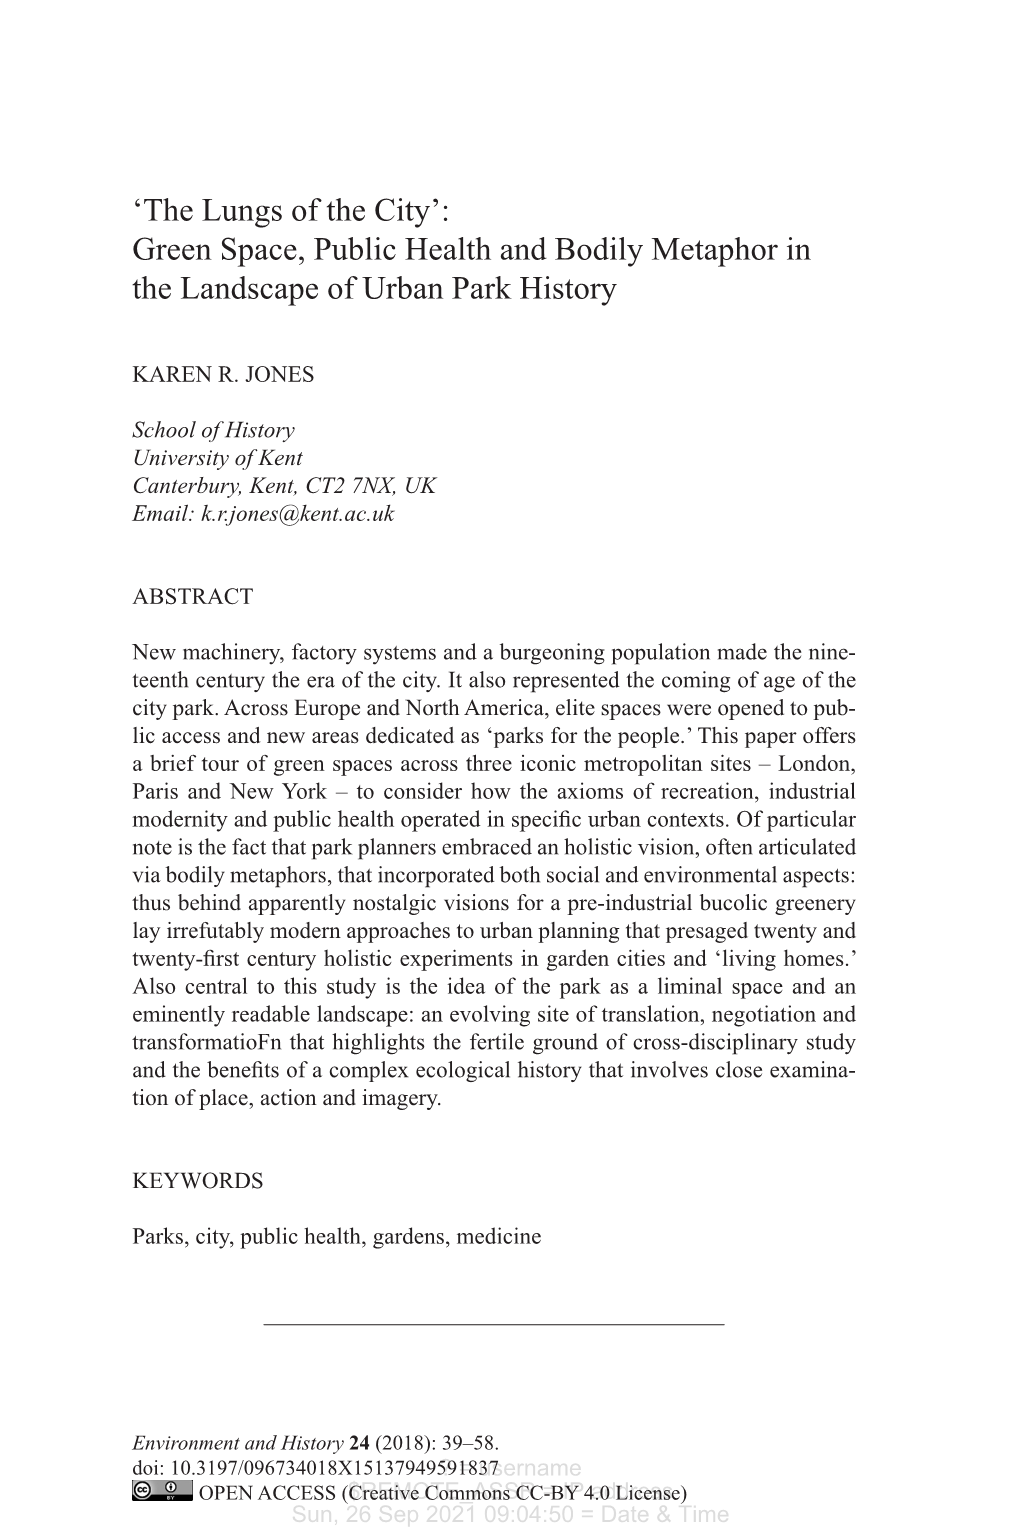 Green Space, Public Health and Bodily Metaphor in the Landscape of Urban Park History